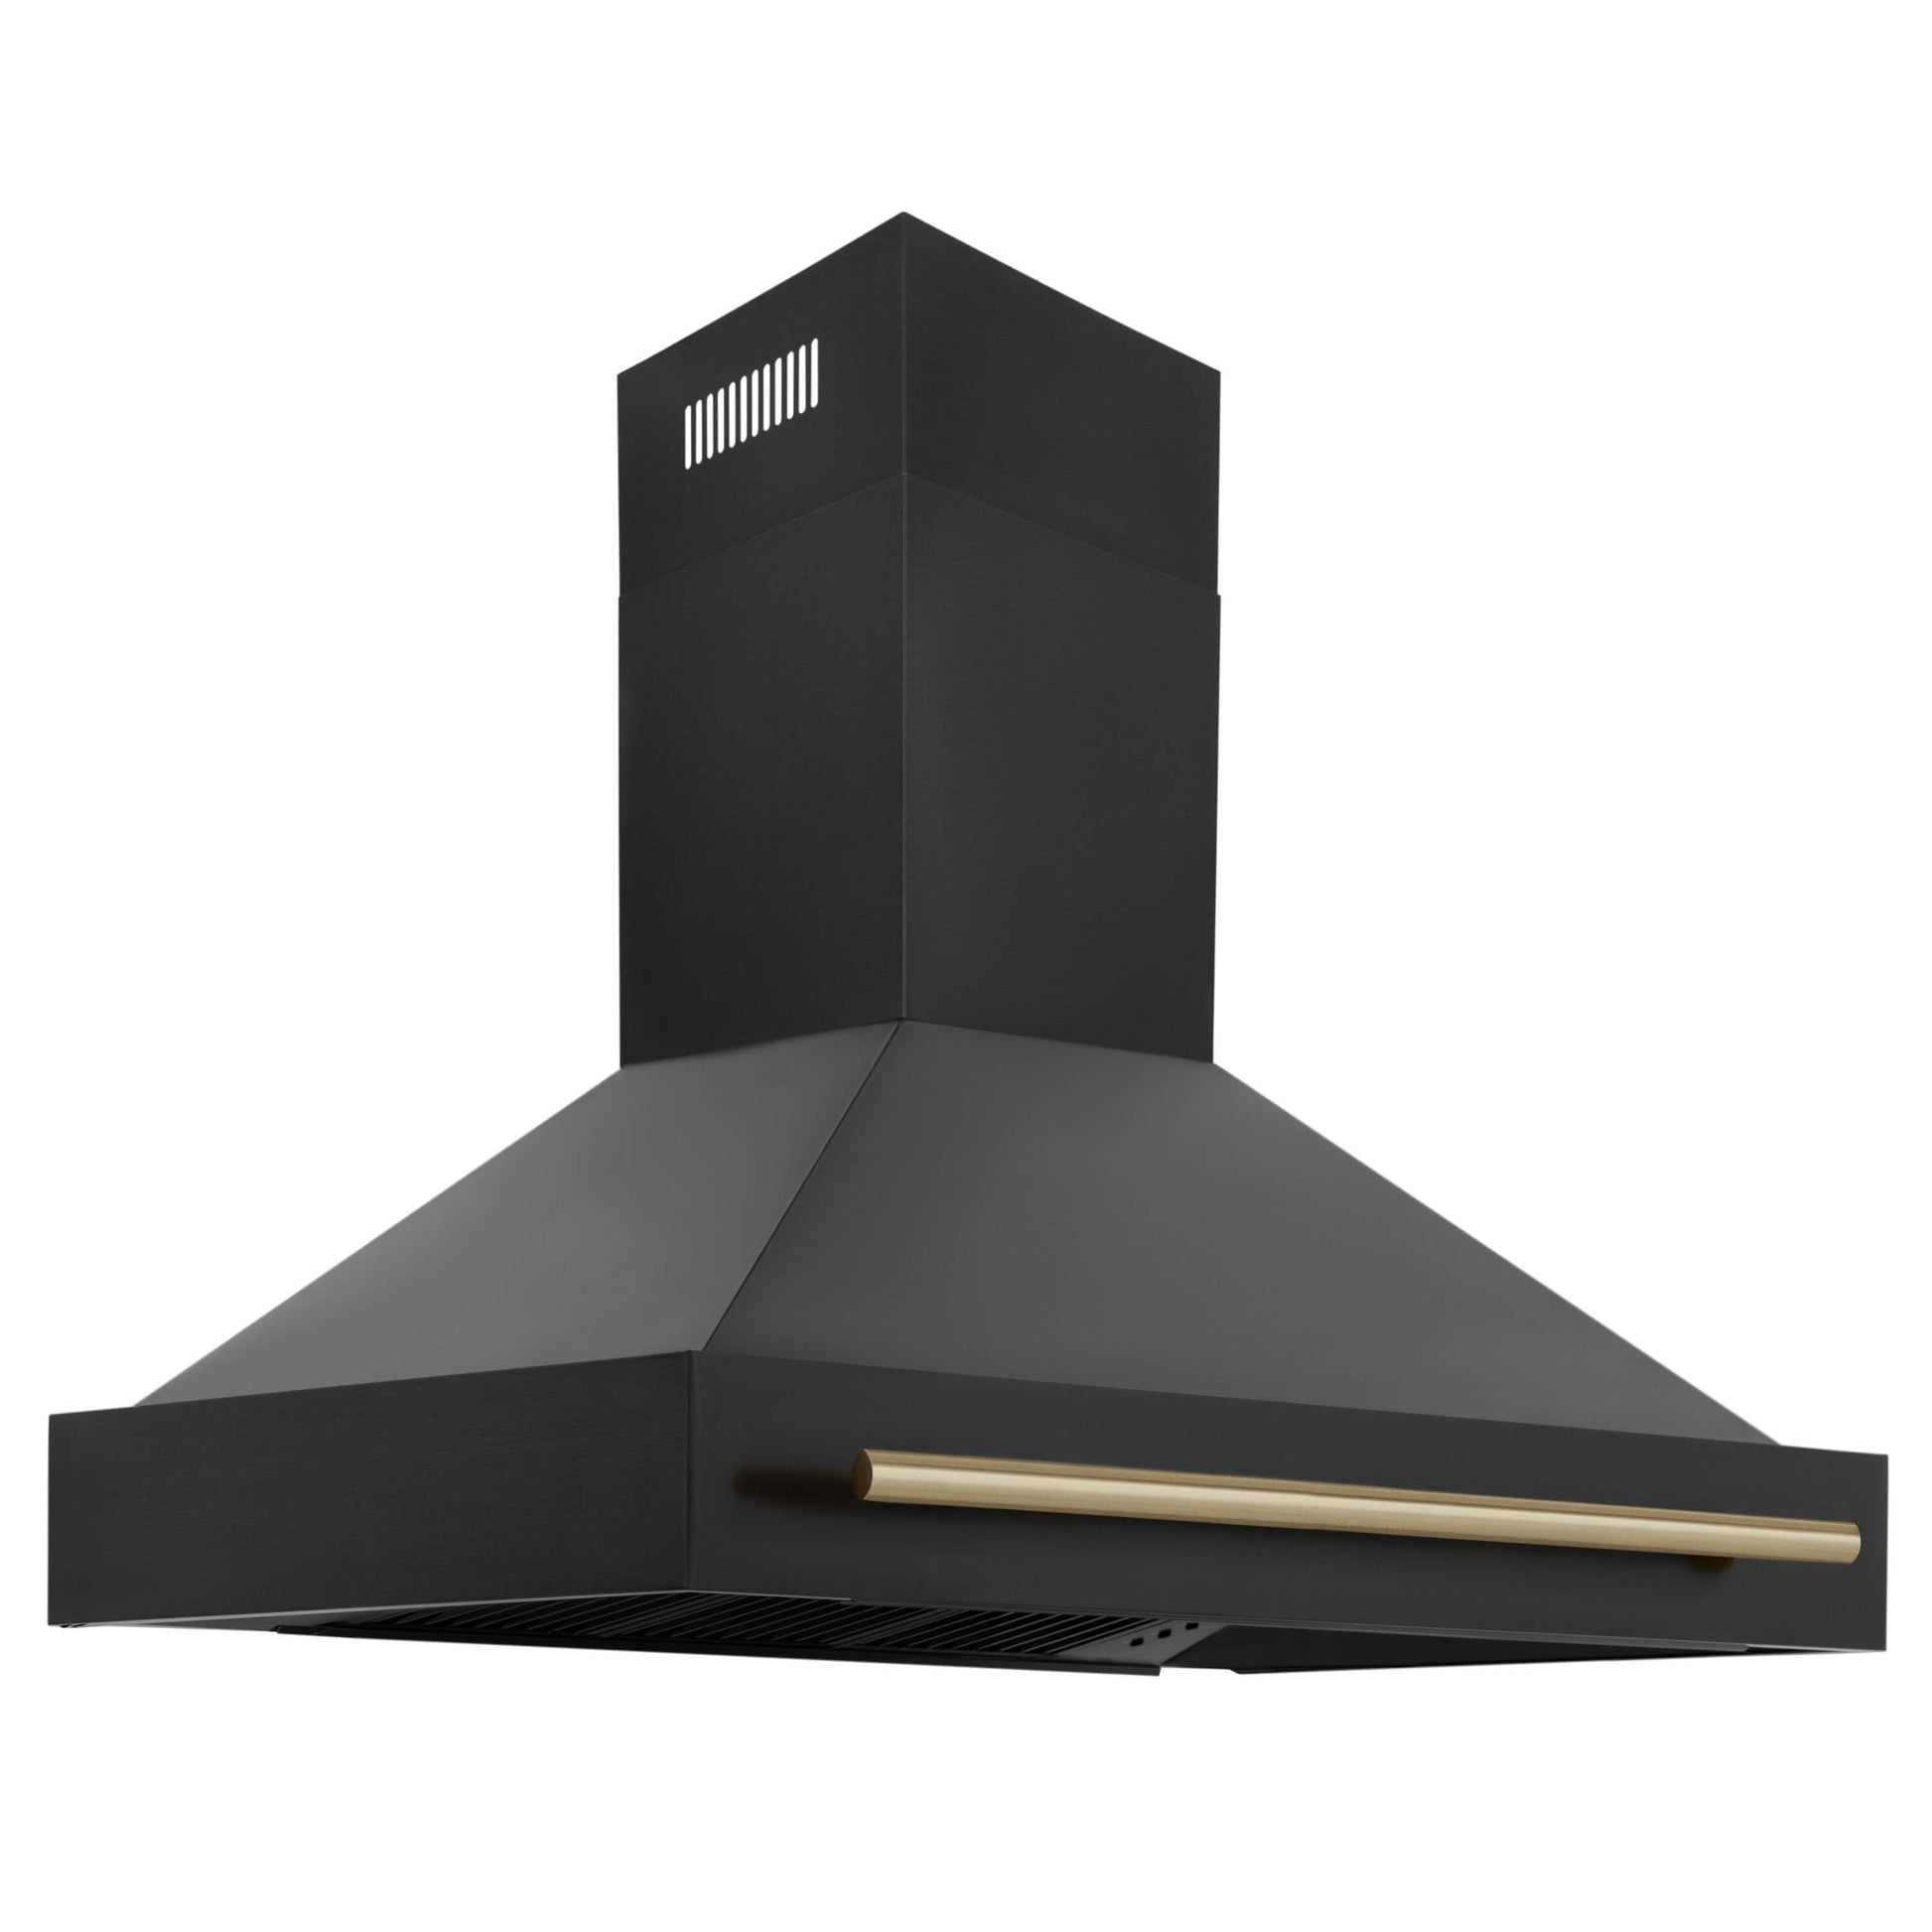 ZLINE 4-Appliance 48" Autograph Edition Kitchen Package with Black Stainless Steel Dual Fuel Range, Range Hood, Dishwasher, and Refrigeration with Champagne Bronze Accents